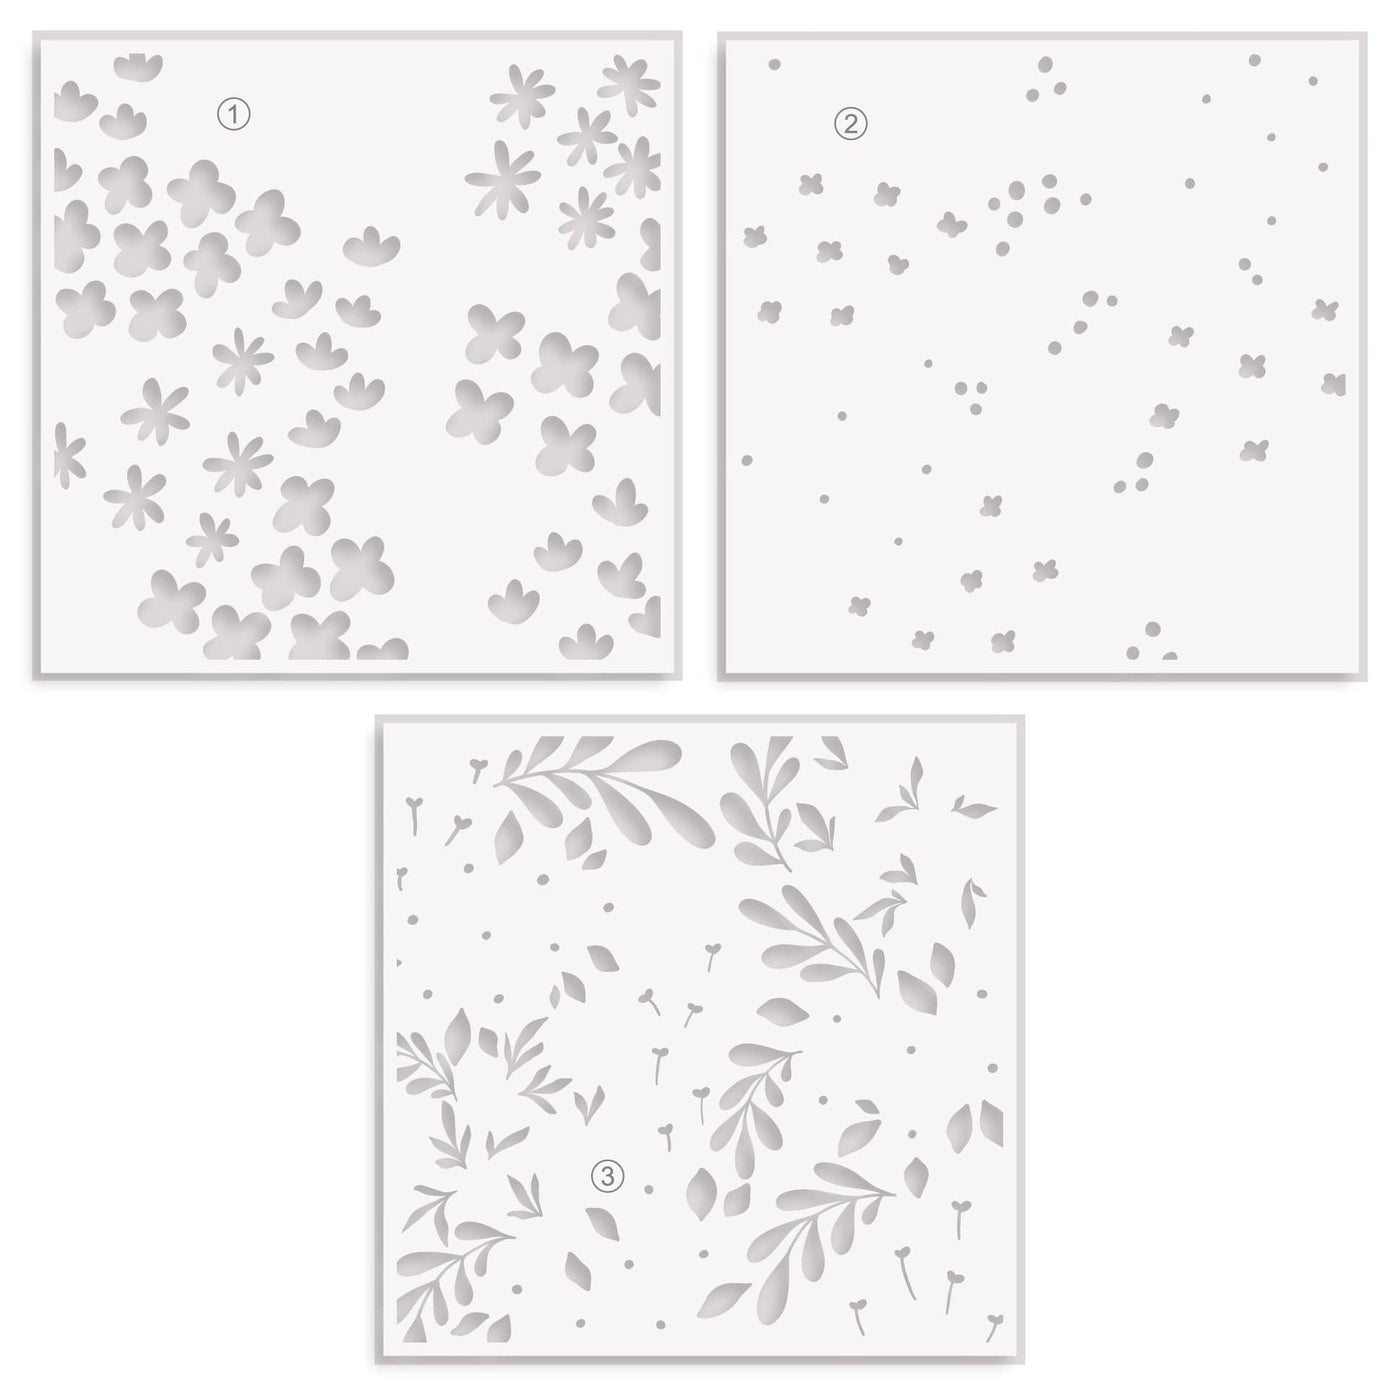 Photocentric Stencil Blooming Flower Bed Stencil Set (3 in 1)